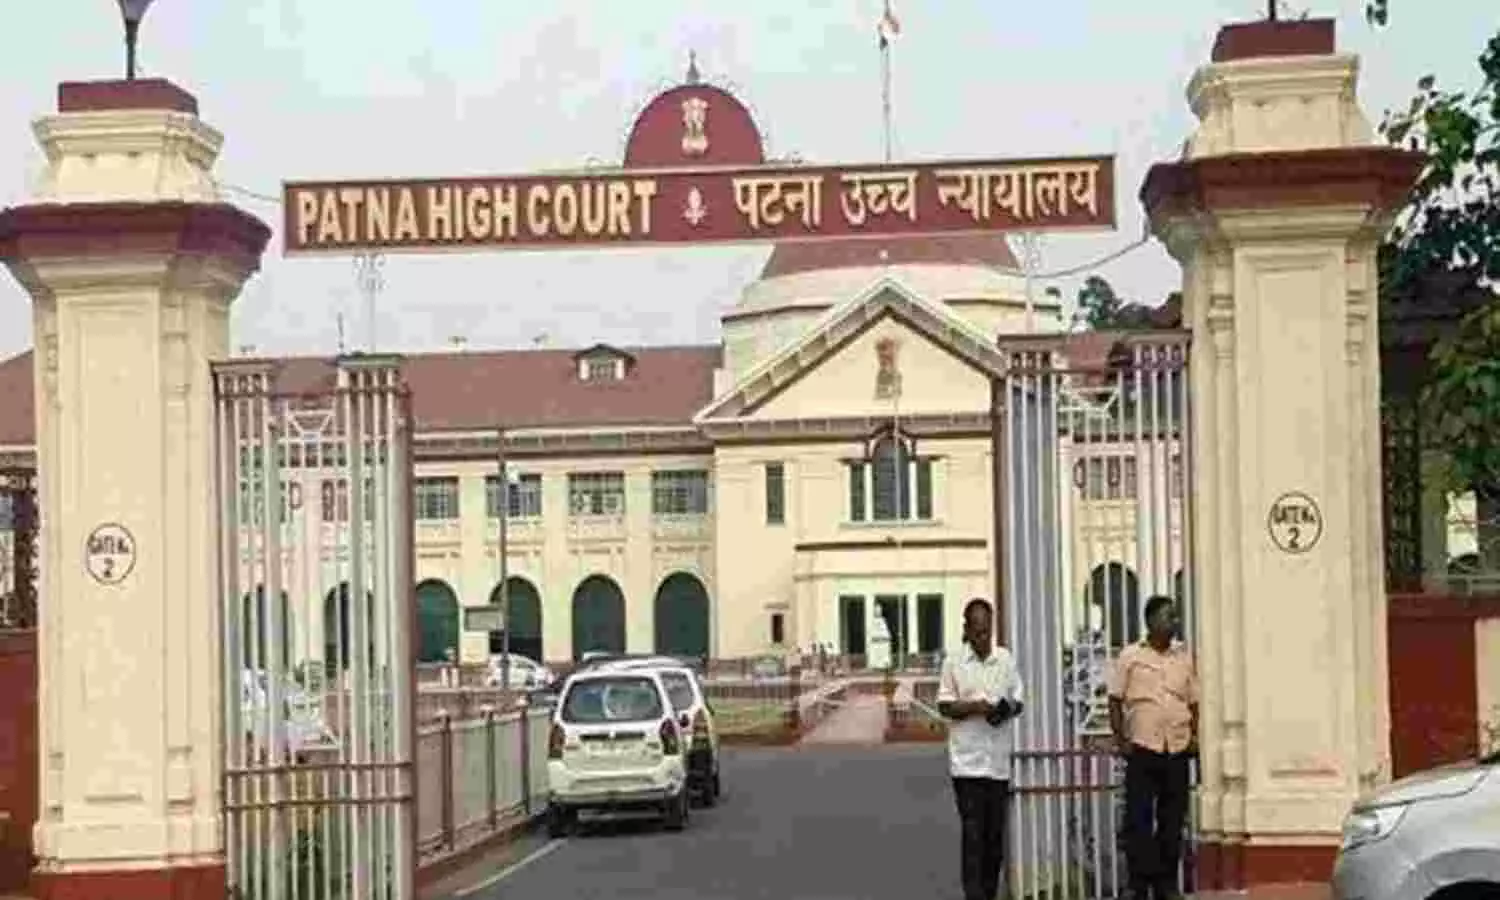 Private Hospitals Failure to Provide Timely Treatment would be Violation of Article 21: Patna HC